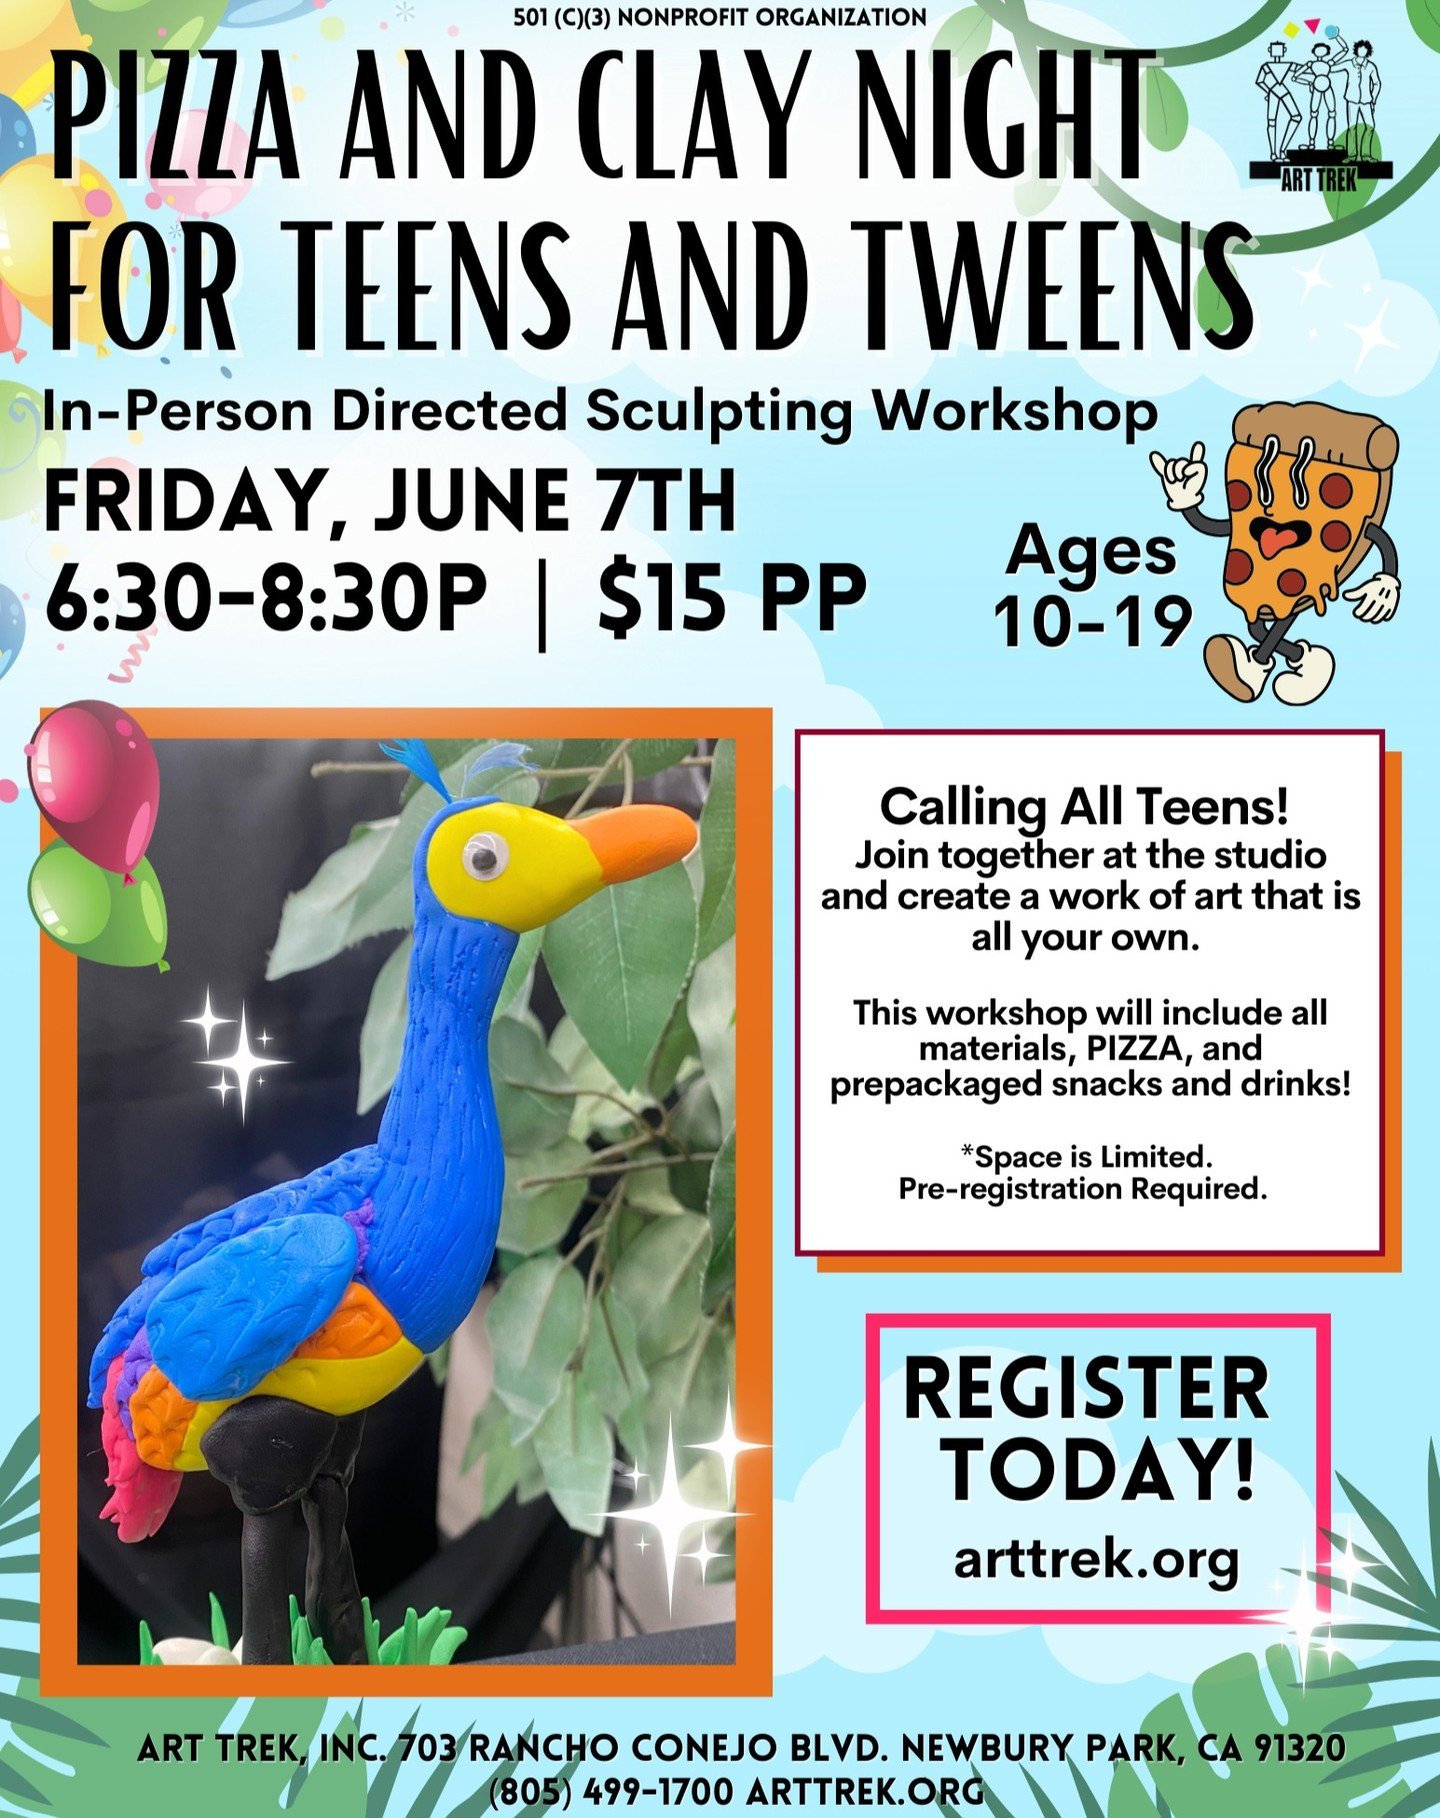 Calling all Tweens and Teens! Join us ⭐NEXT FRIDAY⭐ for Pizza and Clay Night! 🎨🍕

Next Friday, June 7th
6:30-8:30 PM
Ages 10-19
$15 Per Person

All art supplies will be provided for this activity. Pizza and snacks will be served! 💫

Register today